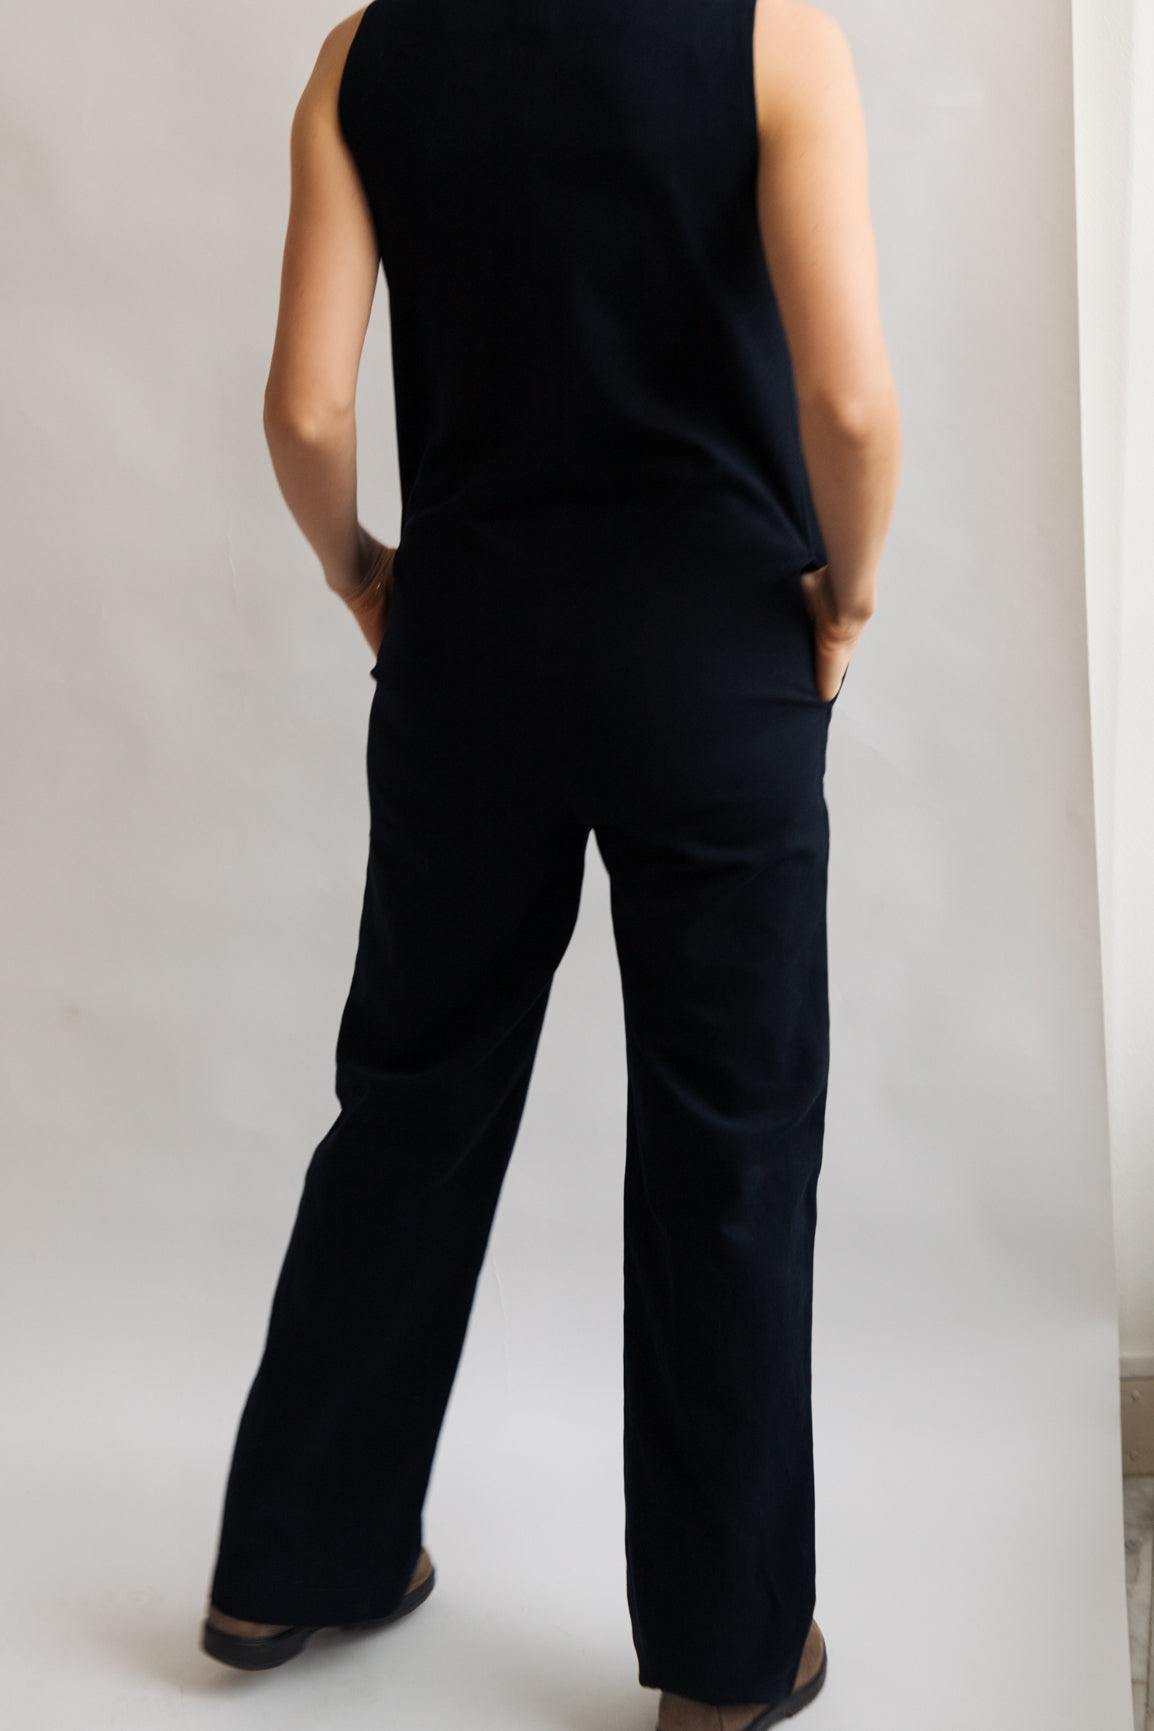 Navy dark blue color Jumpsuit overall workwear cotton canvas with pockets 5 buttons v-neck tall girls short girls oeko-tex sustainable clothes handmade